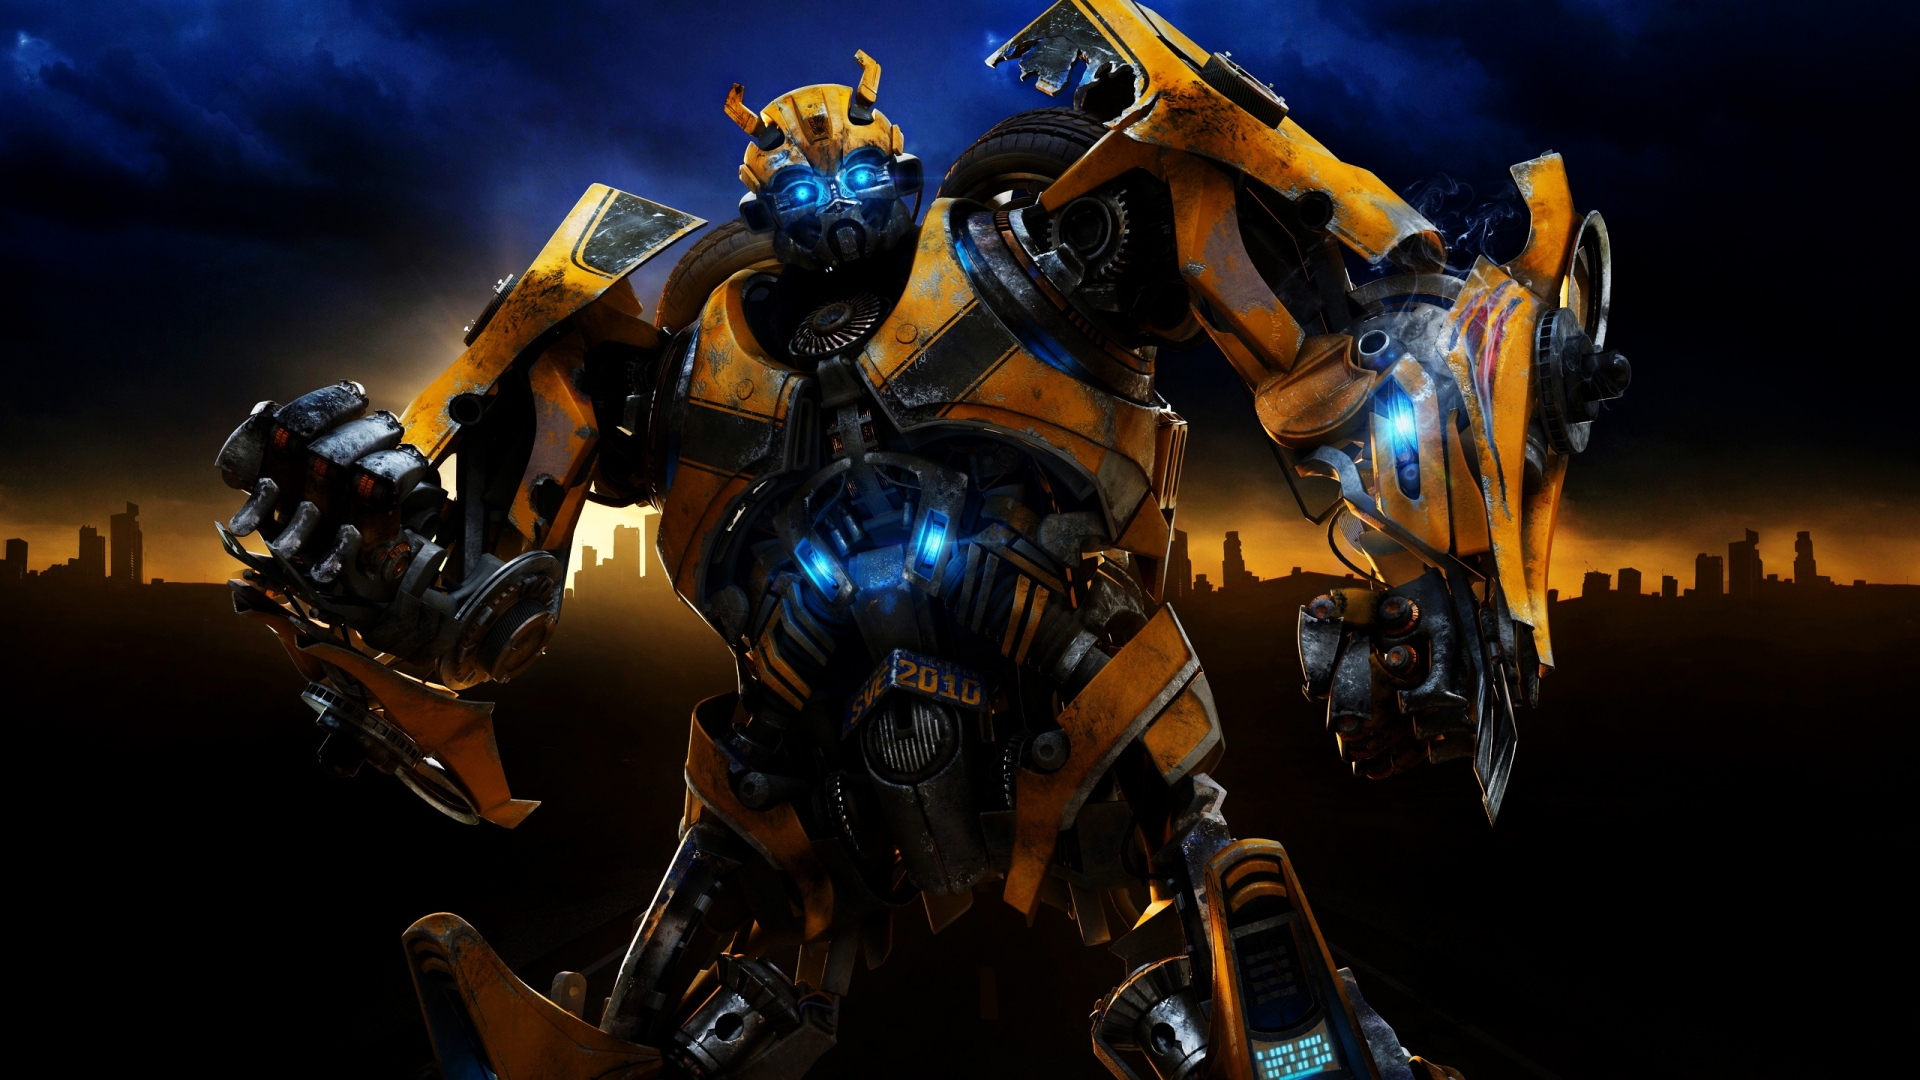 Transformers 2 for 1920 x 1080 HDTV 1080p resolution